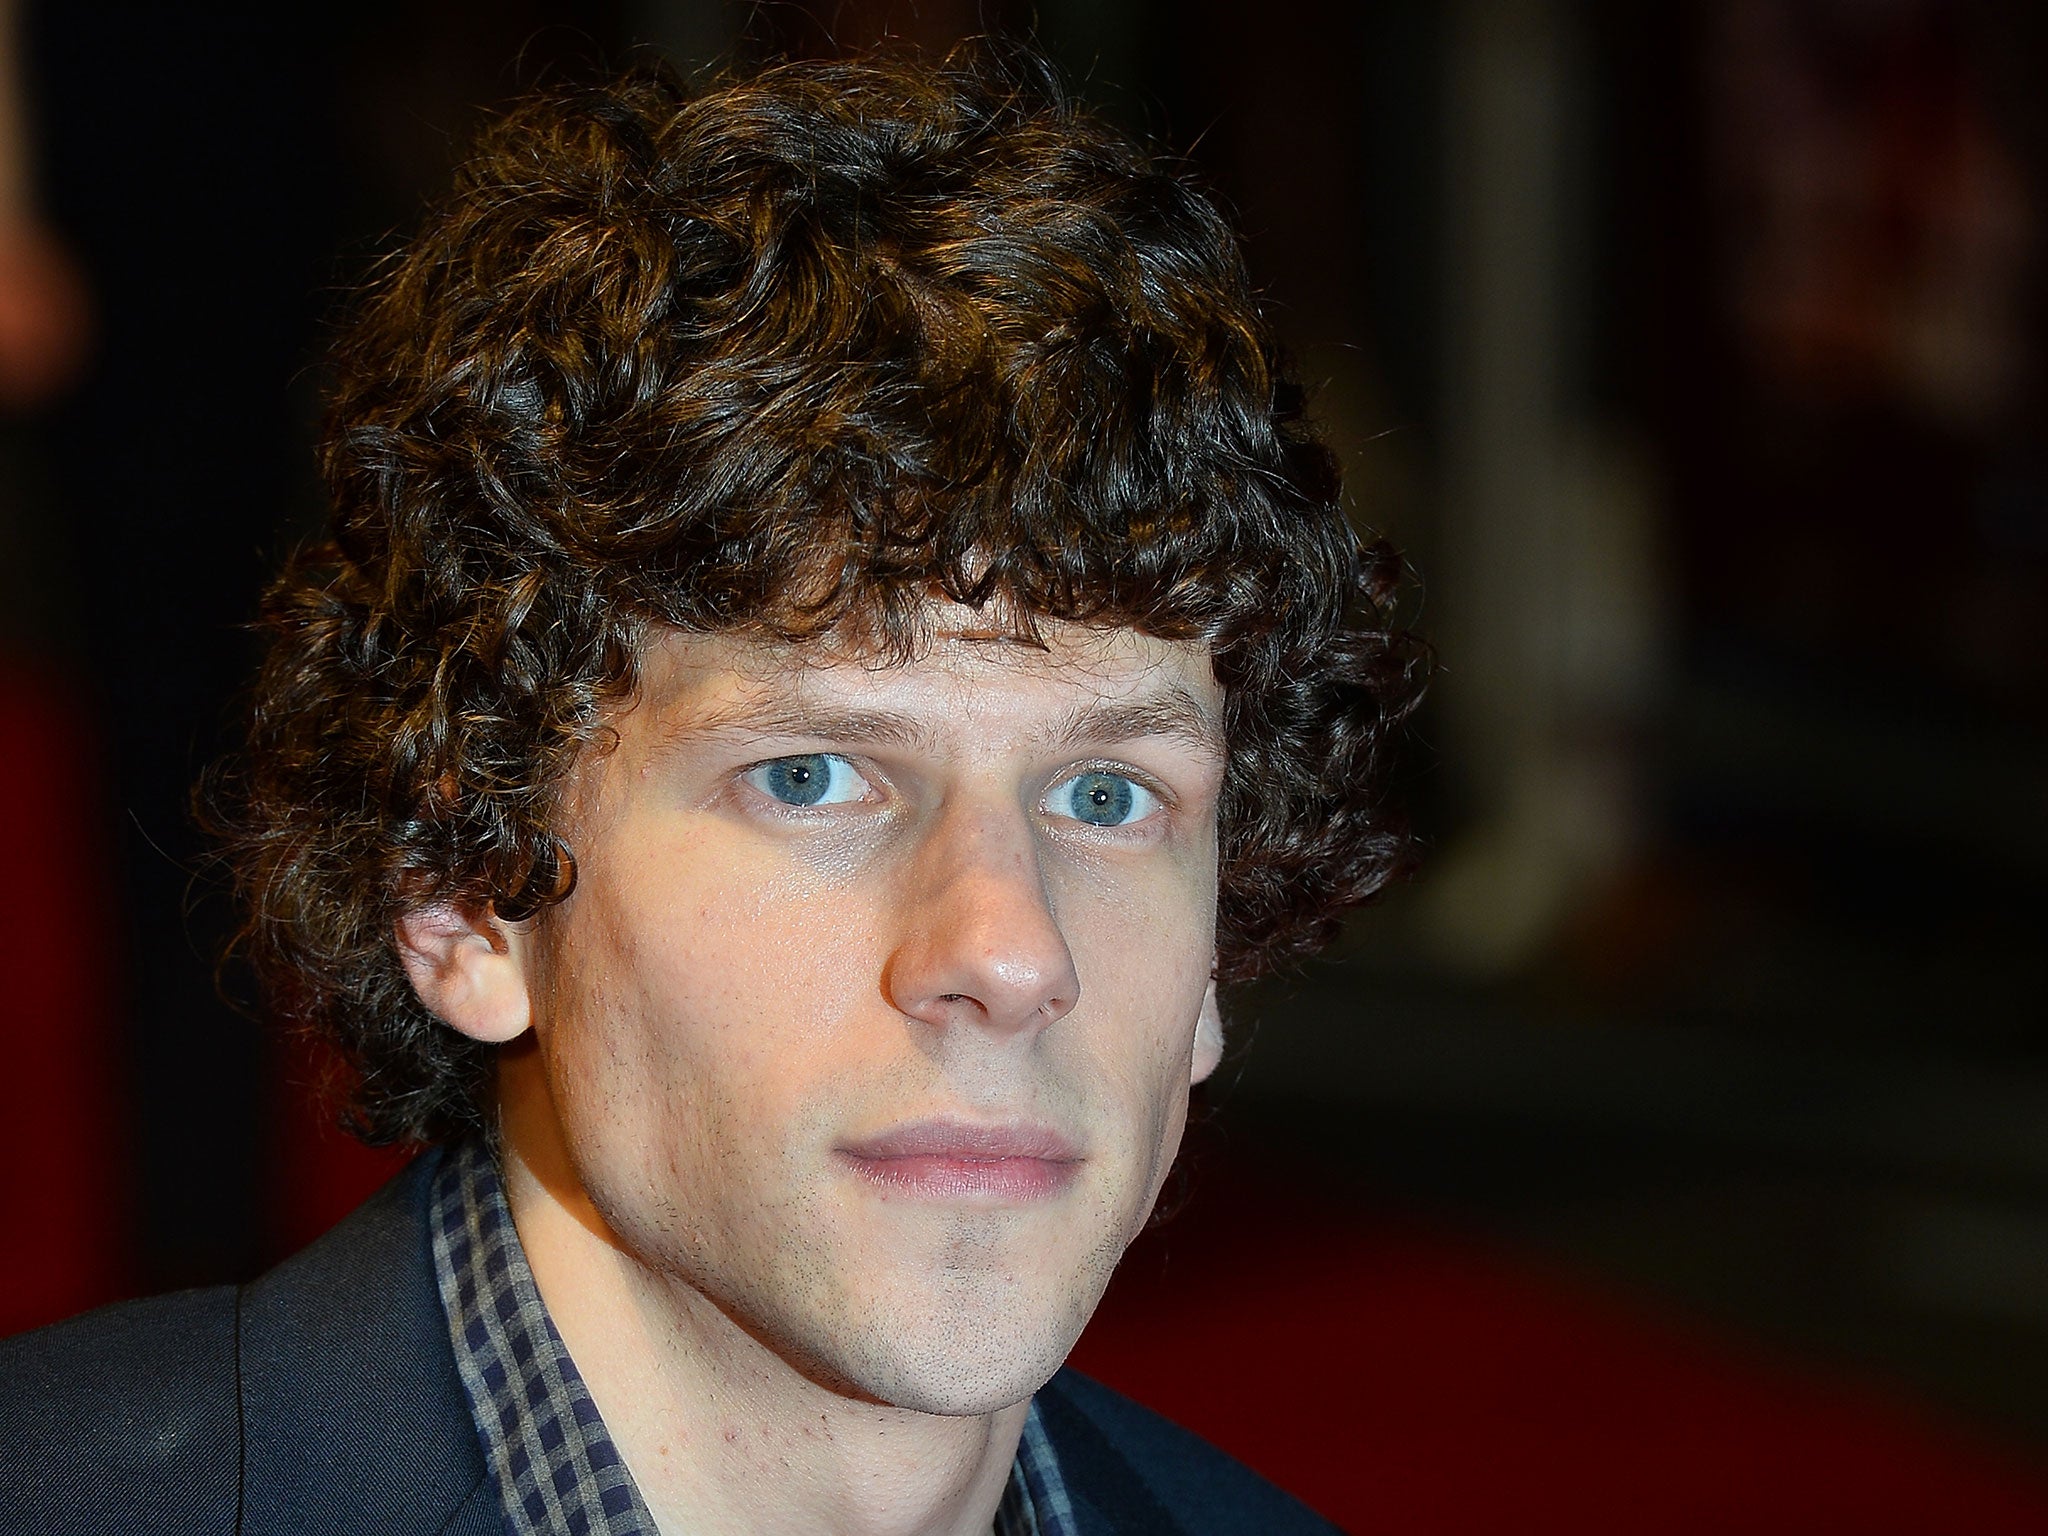 Jesse Eisenberg attends the London premiere of his film, The Double